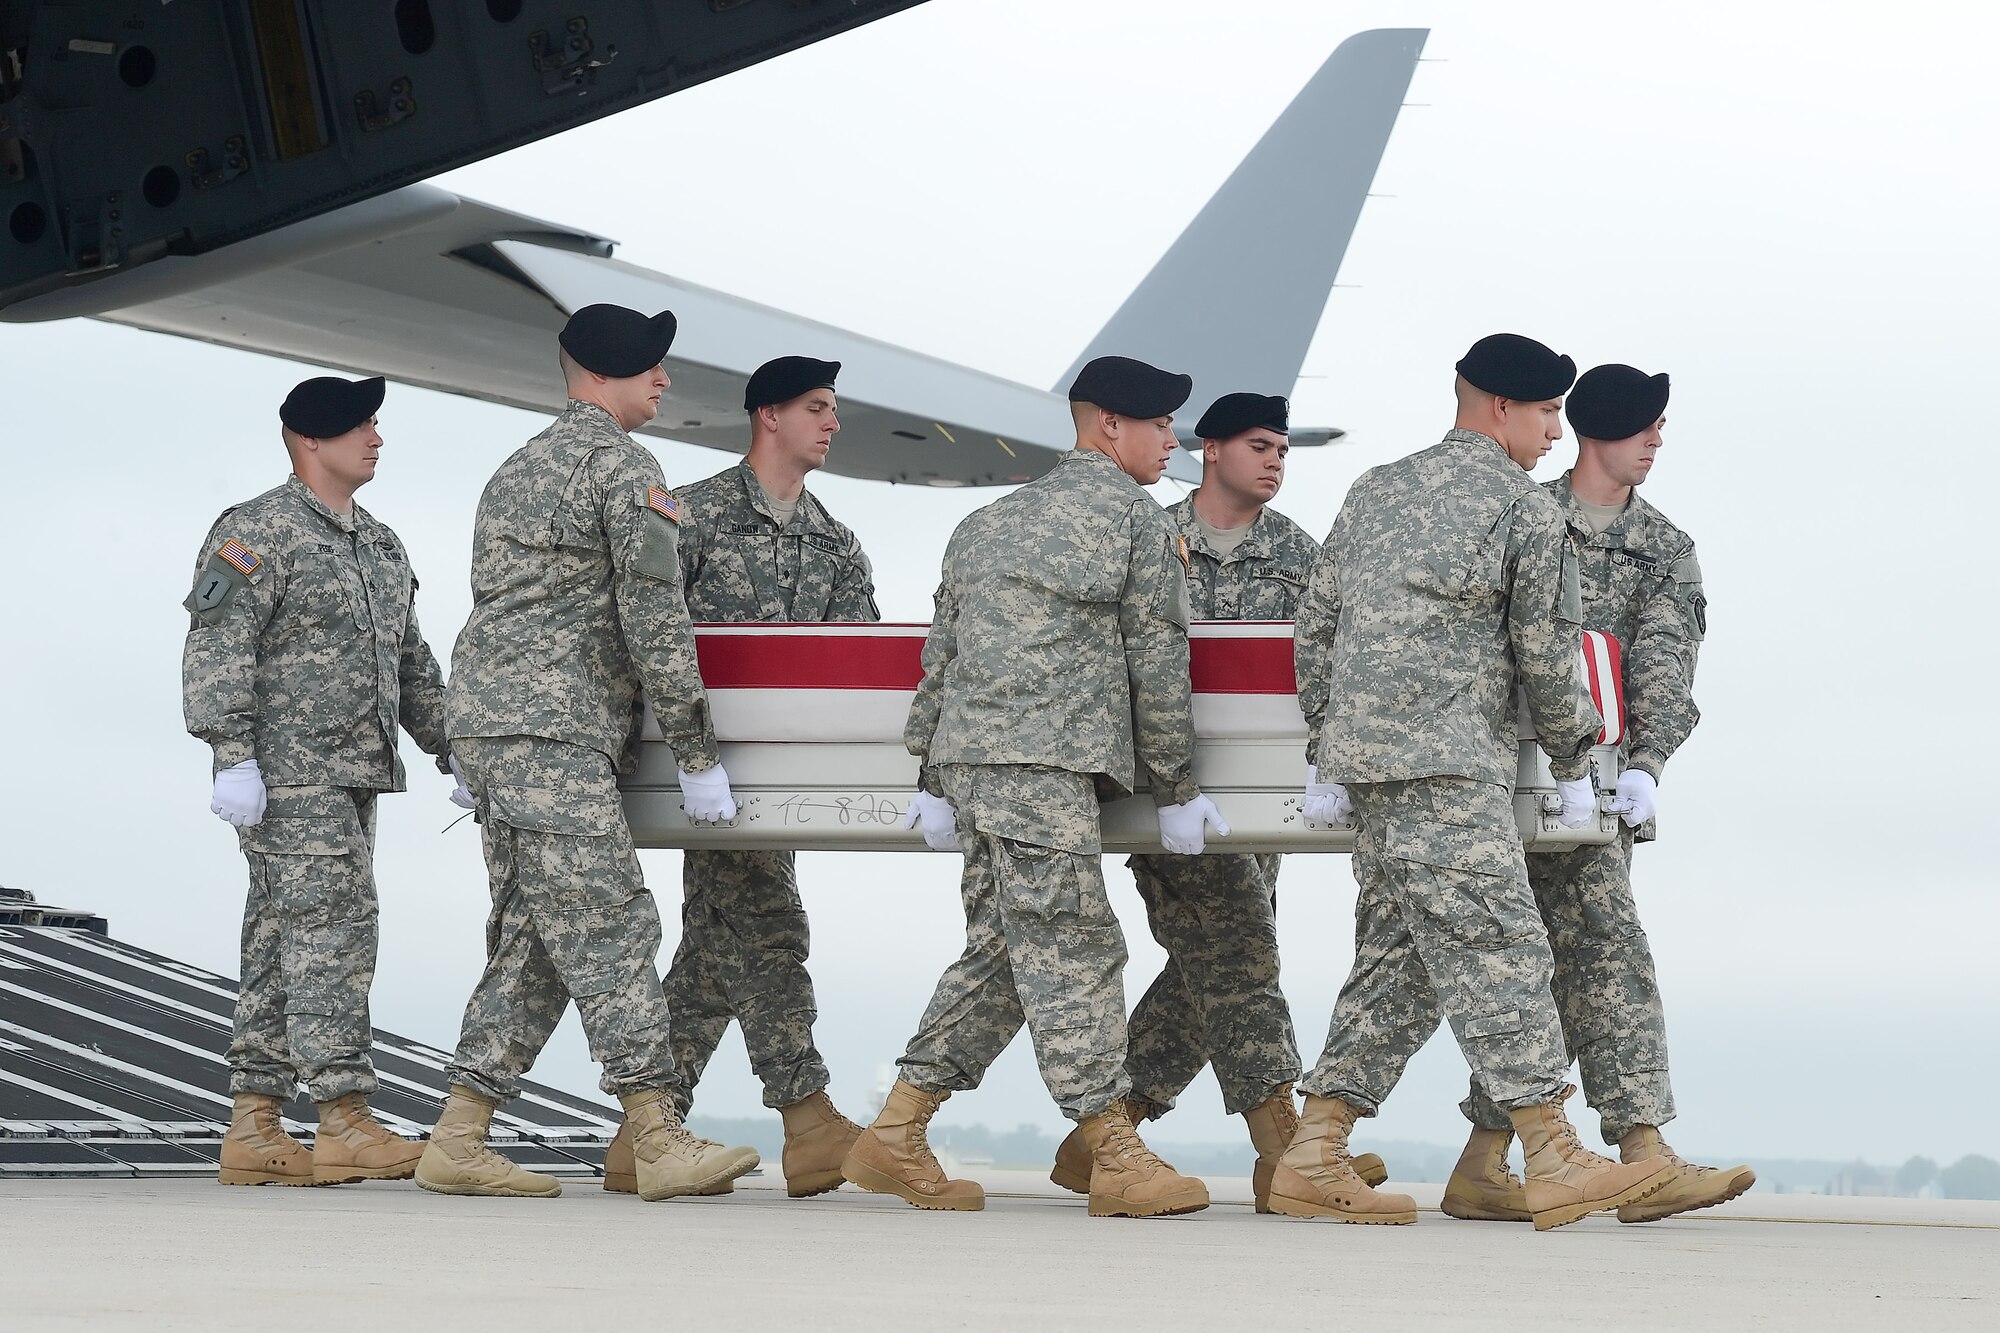 A U.S. Army carry team transfers the remains of Cpl. Justin R. Clouse of Sprague, Wash., during a dignified transfer June 12, 2014, at Dover Air Force Base, Del. Clouse was assigned to the 2nd Battalion, 12th Infantry Regiment, 4th Infantry Brigade Combat Team, 4th Infantry Division, Fort Carson, Colo. (U.S. Air Force photo/Greg L. Davis)